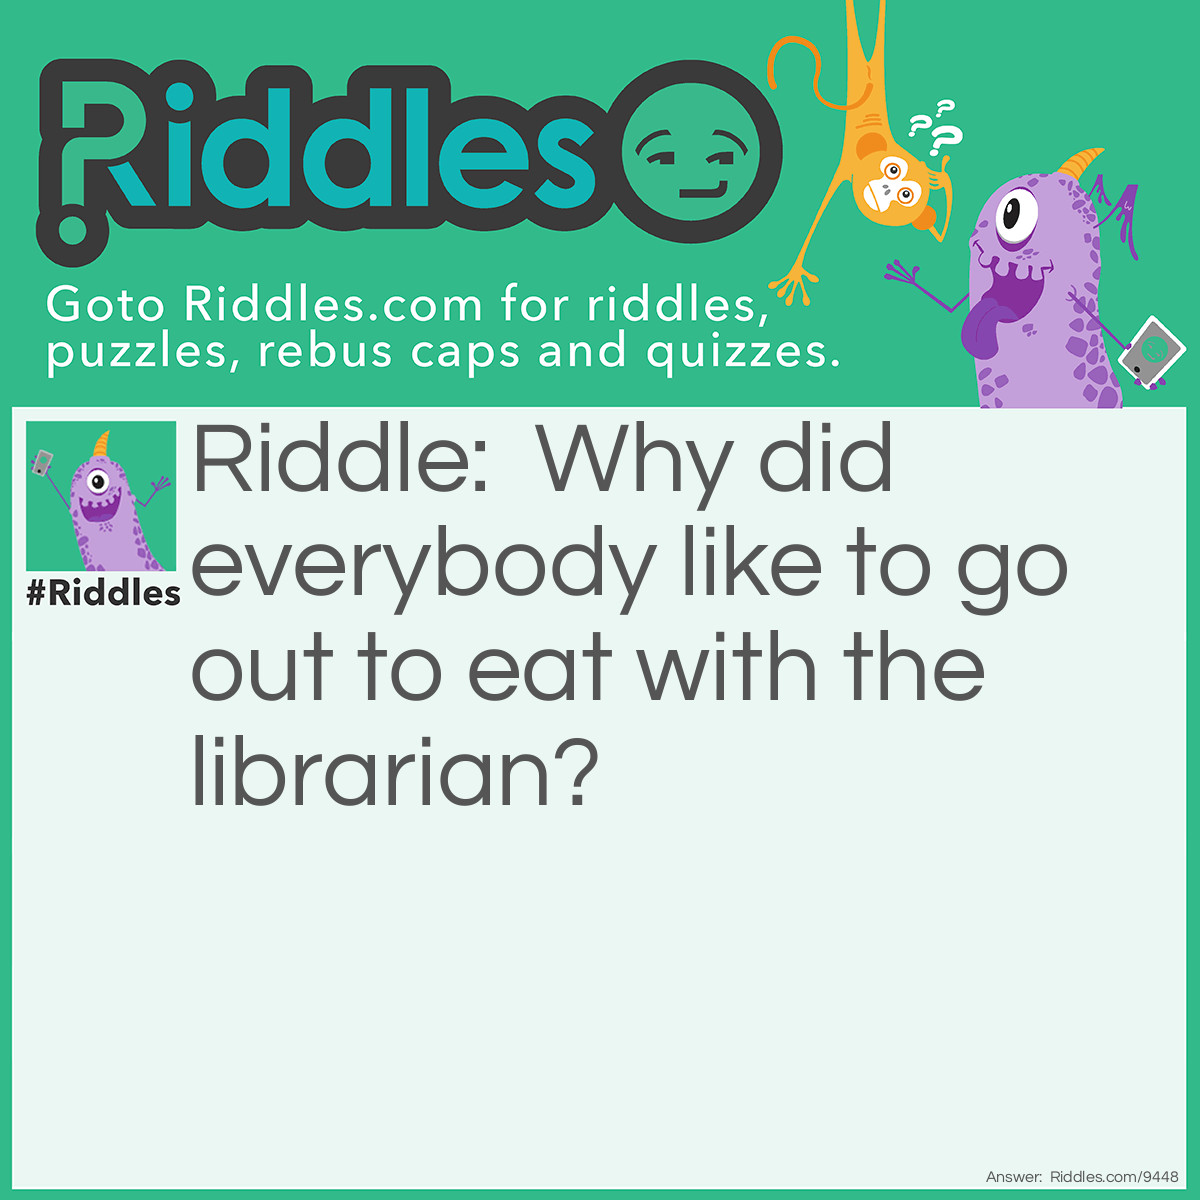 Riddle: Why did everybody like to go out to eat with the librarian? Answer: She could always book a reservation.